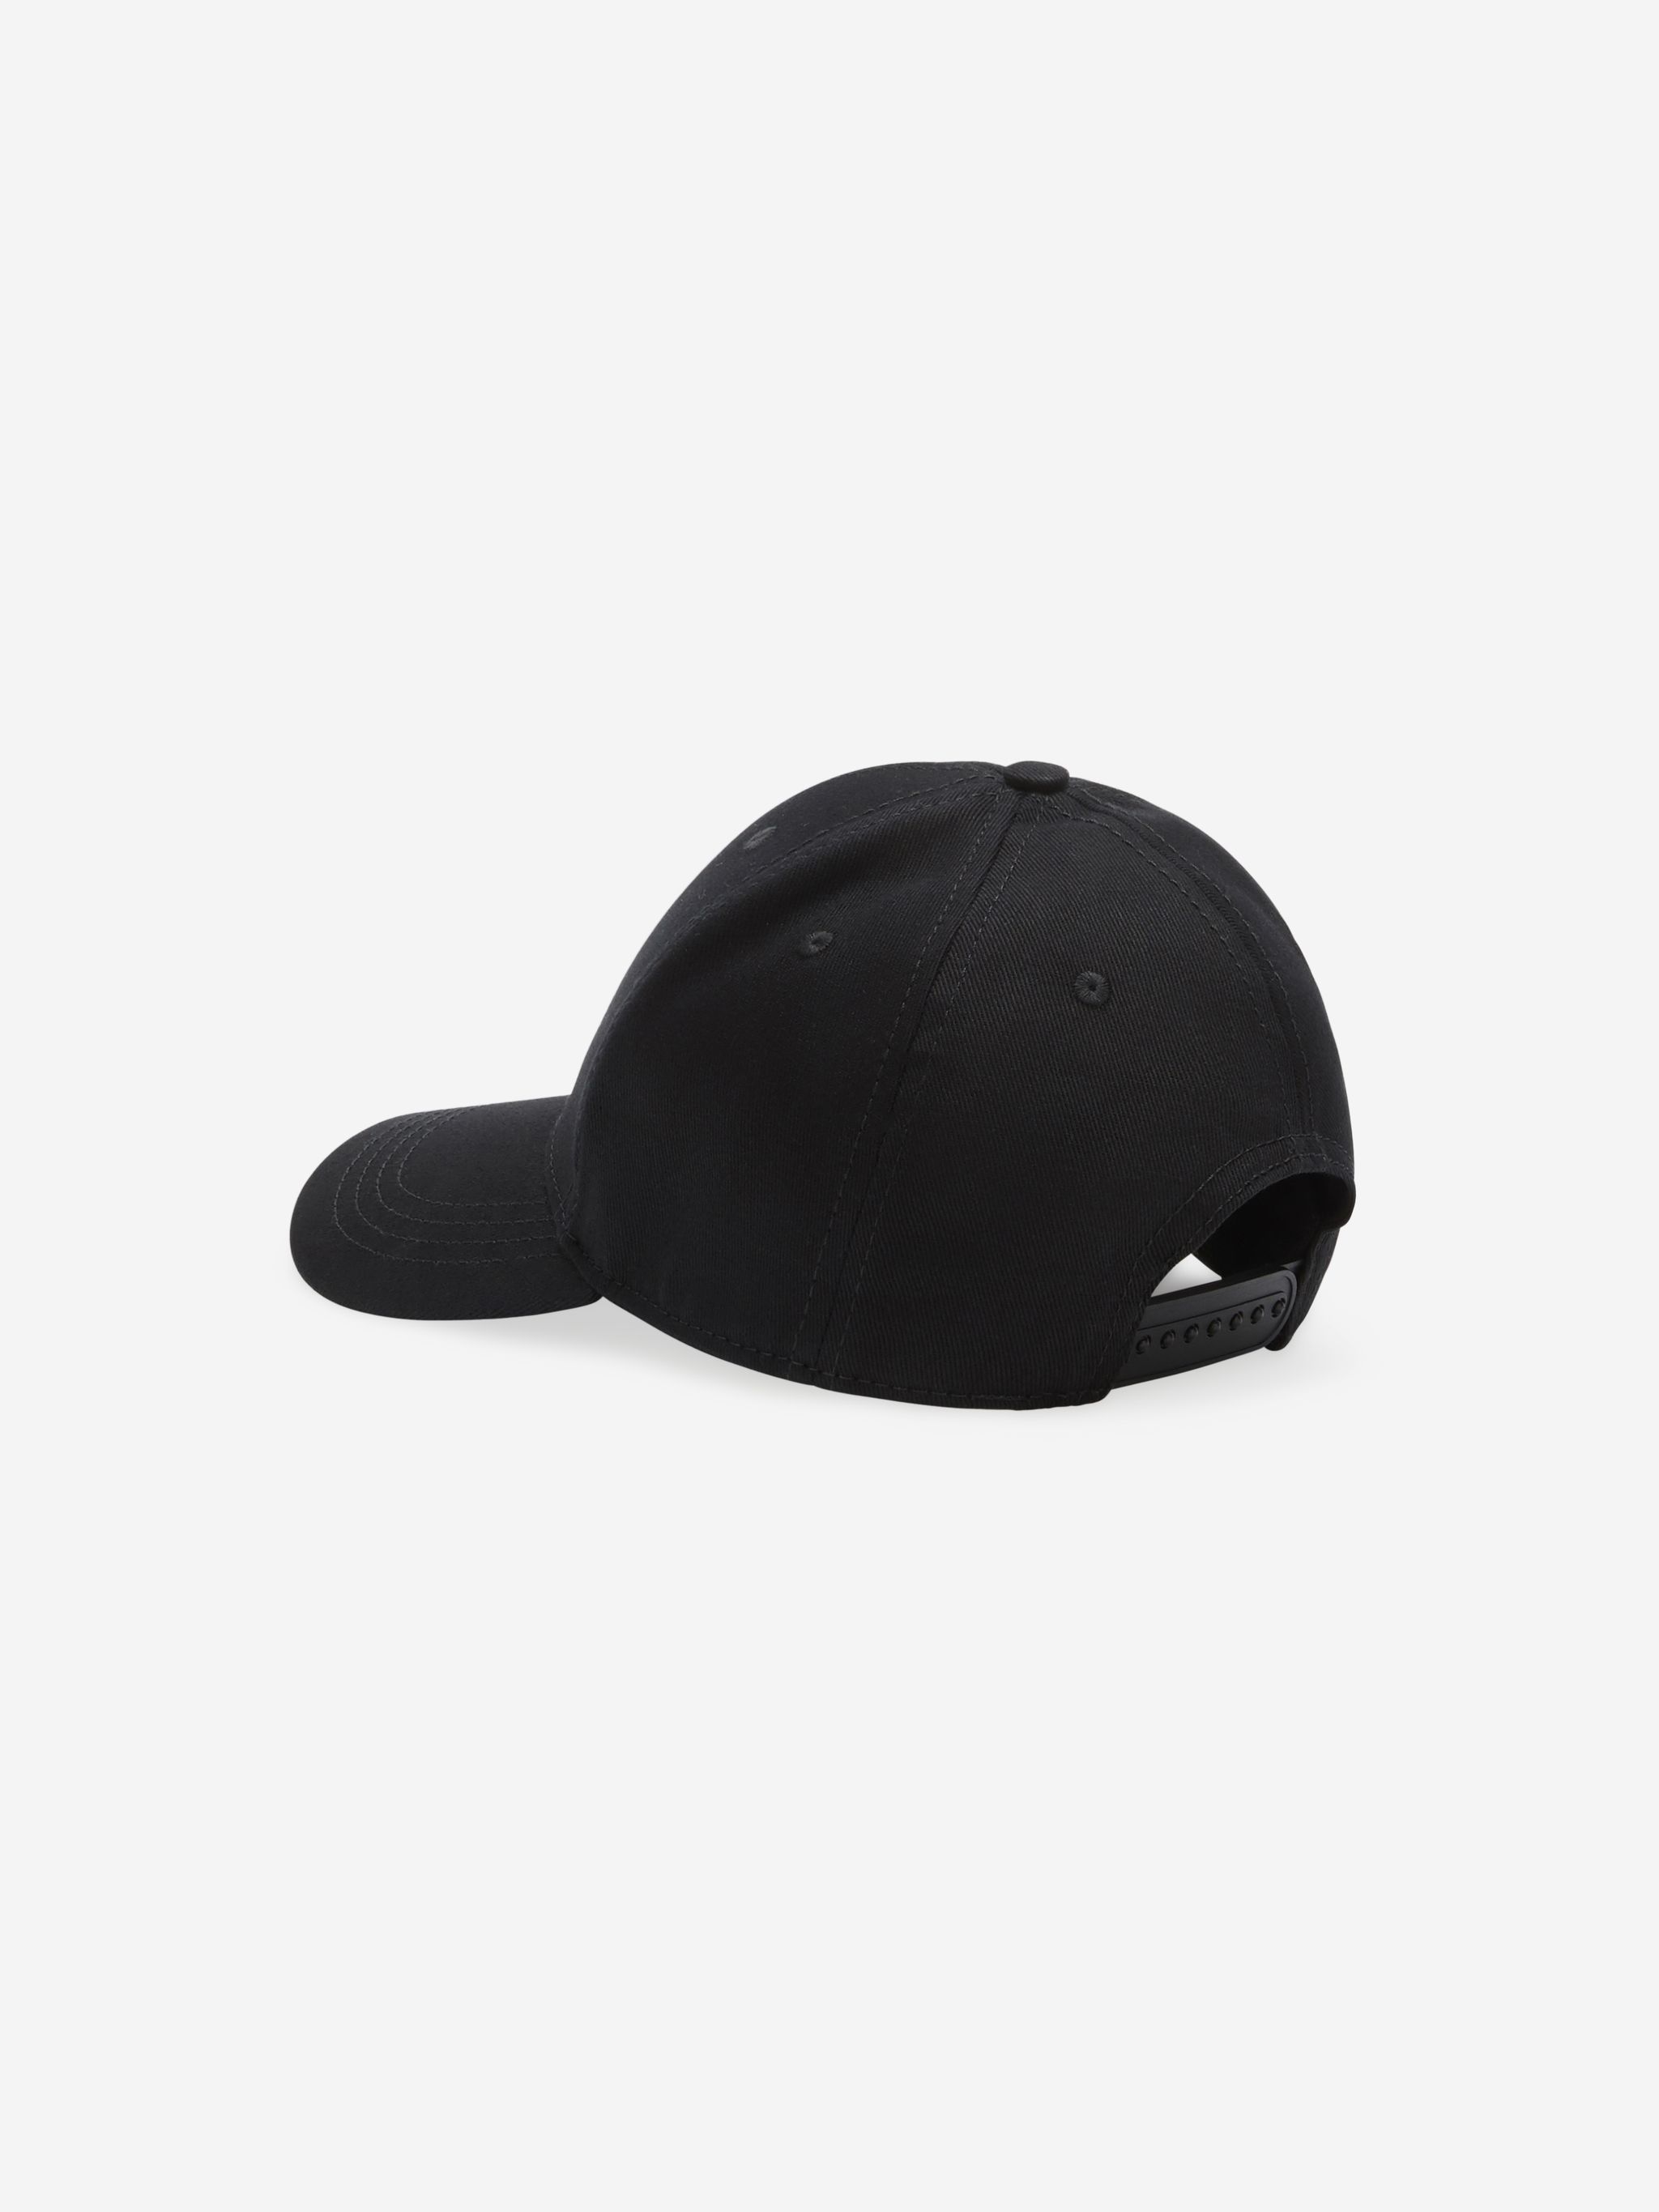 Black cotton Cross embroidery baseball cap from Marcelo Burlon Kids featuring embroidered logo to the front, curved peak, eyelet detailing and adjustable fit.